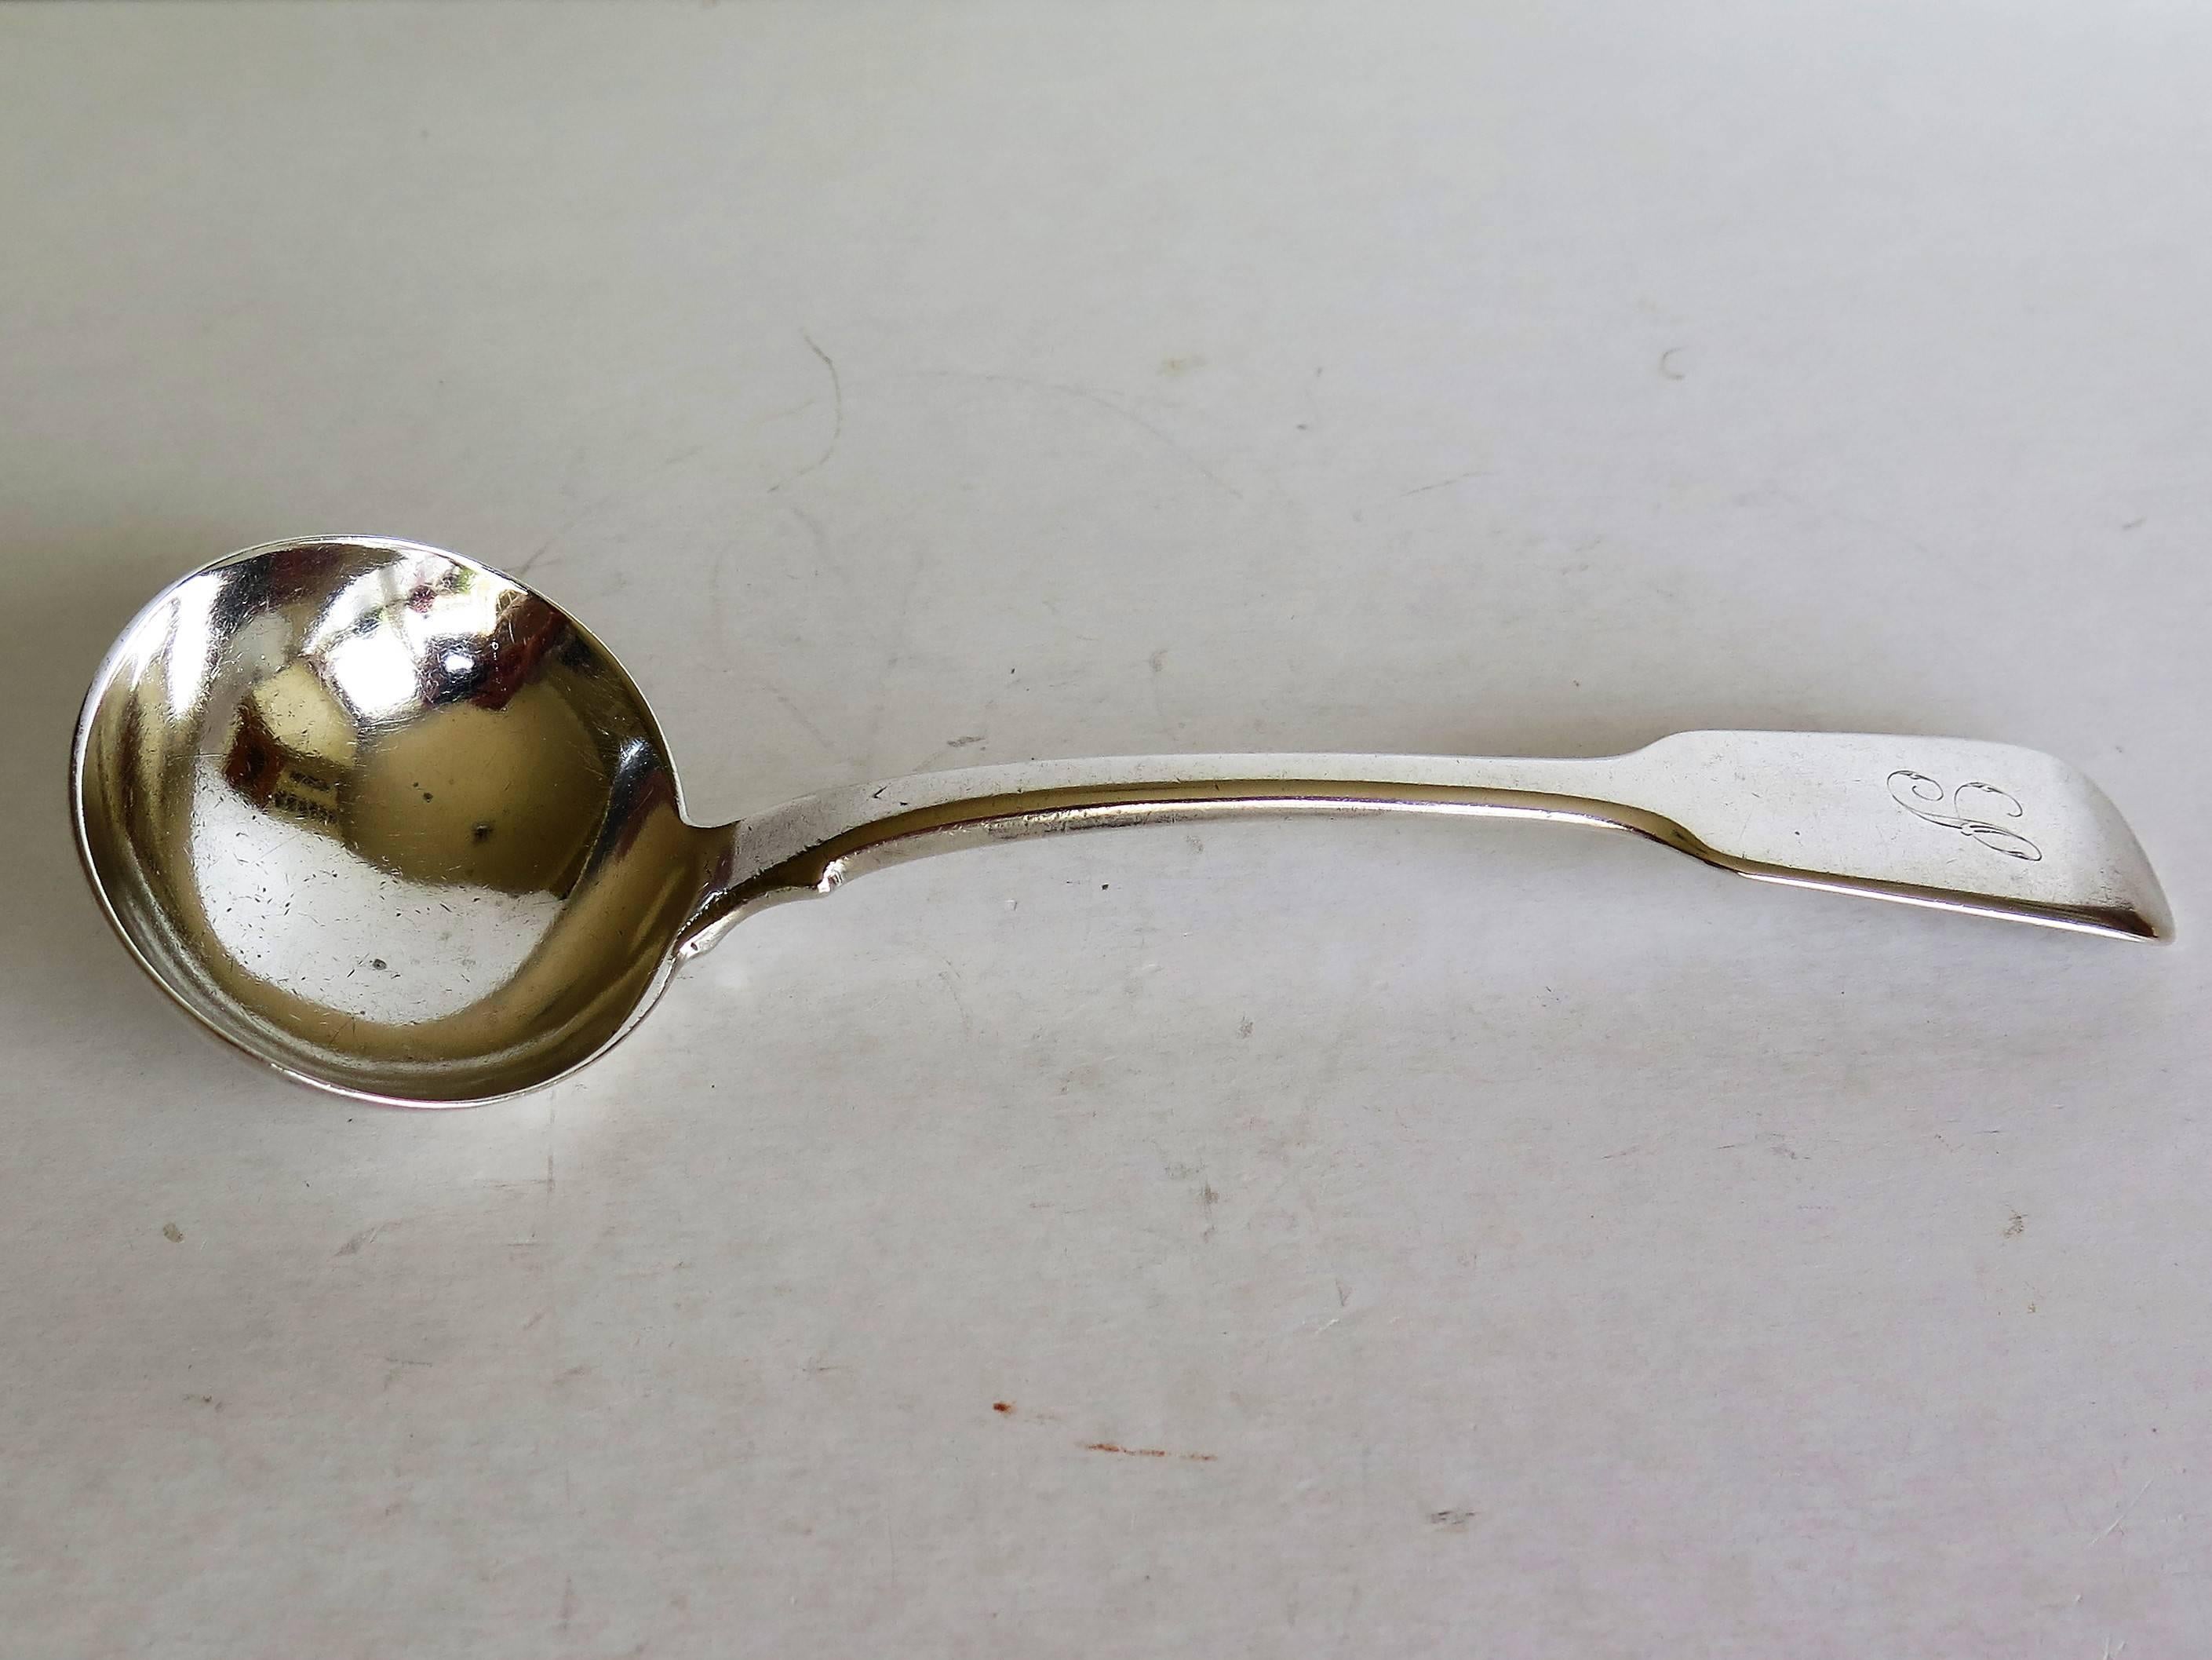 This is a good, heavy, fiddle-back, sterling silver sauce ladle or spoon, made by Charles Boyton of London and dating to very early in Queen Victoria's reign, 1838. 

The ladle has the classic Fiddle back pattern shape which was first made in